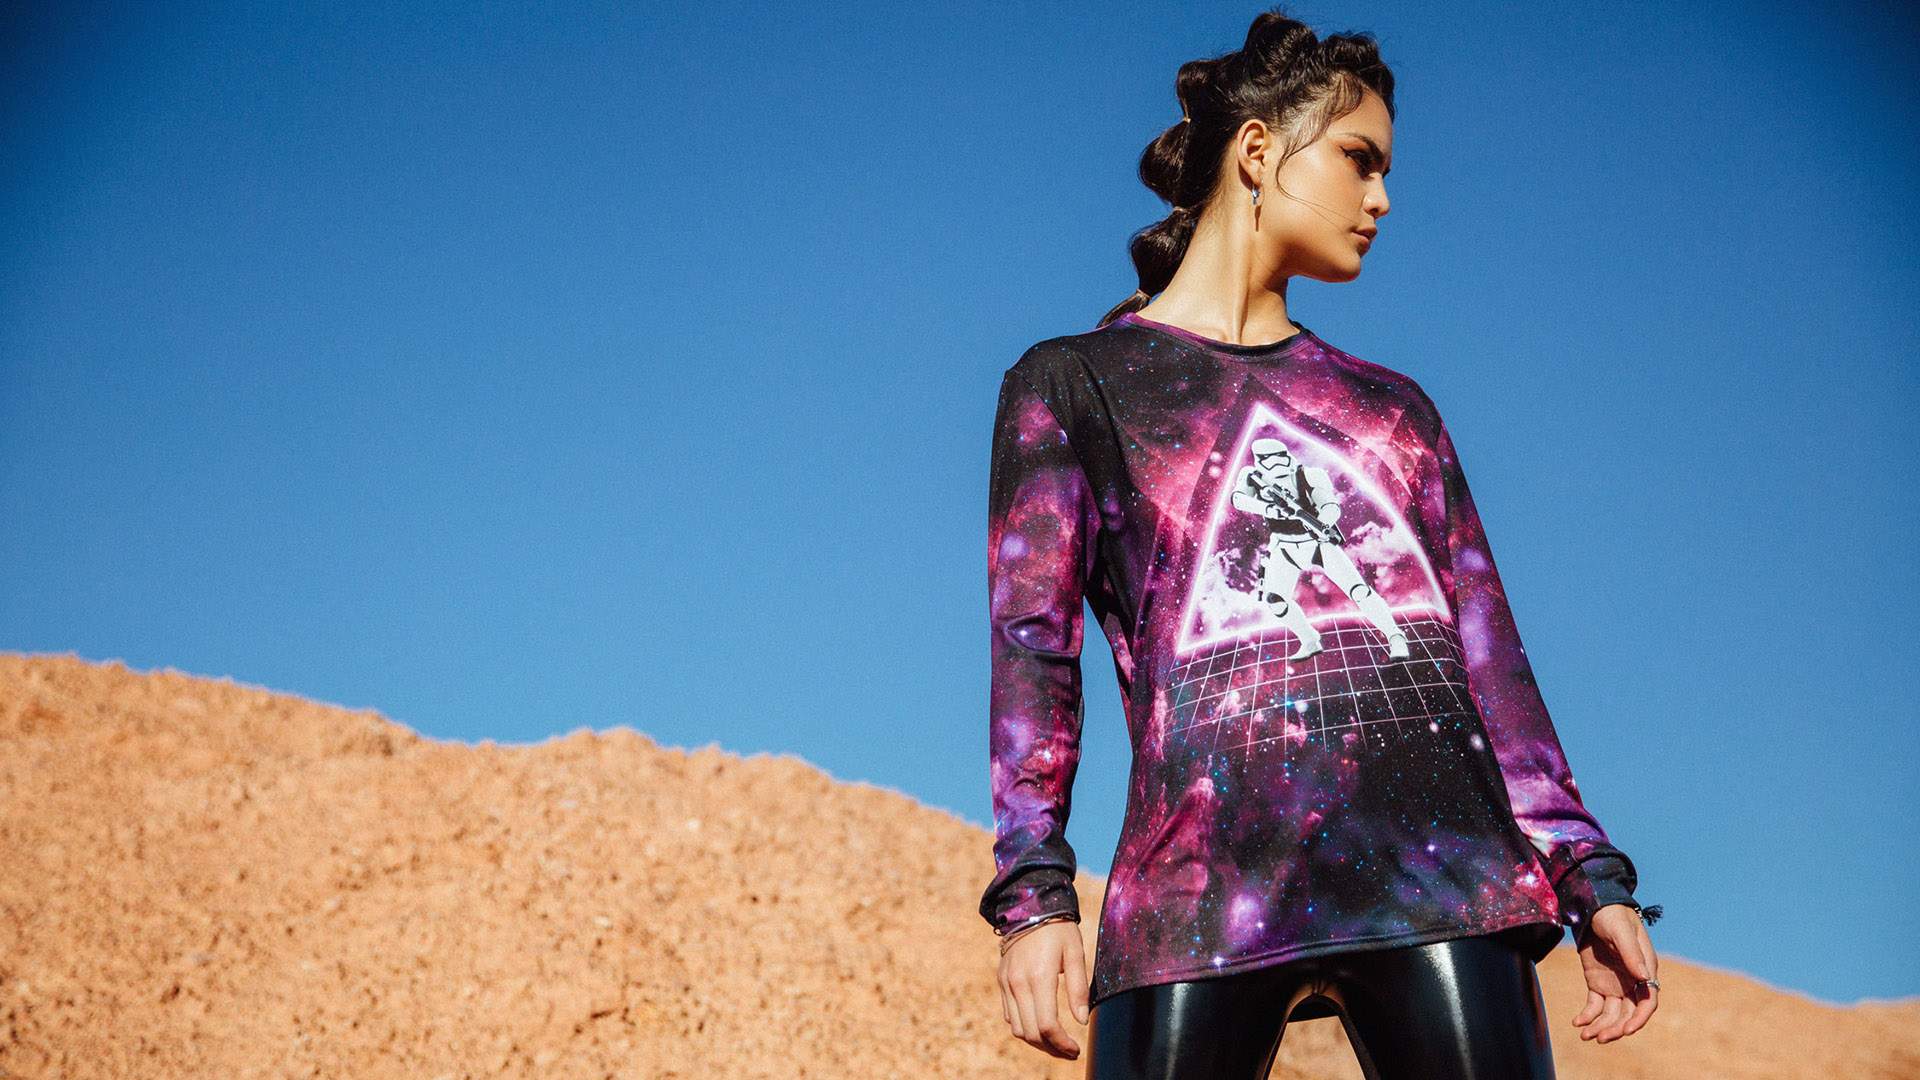 BlackMilk's New 'Star Wars' Collection Will Kit You Out to Defend the Galaxy